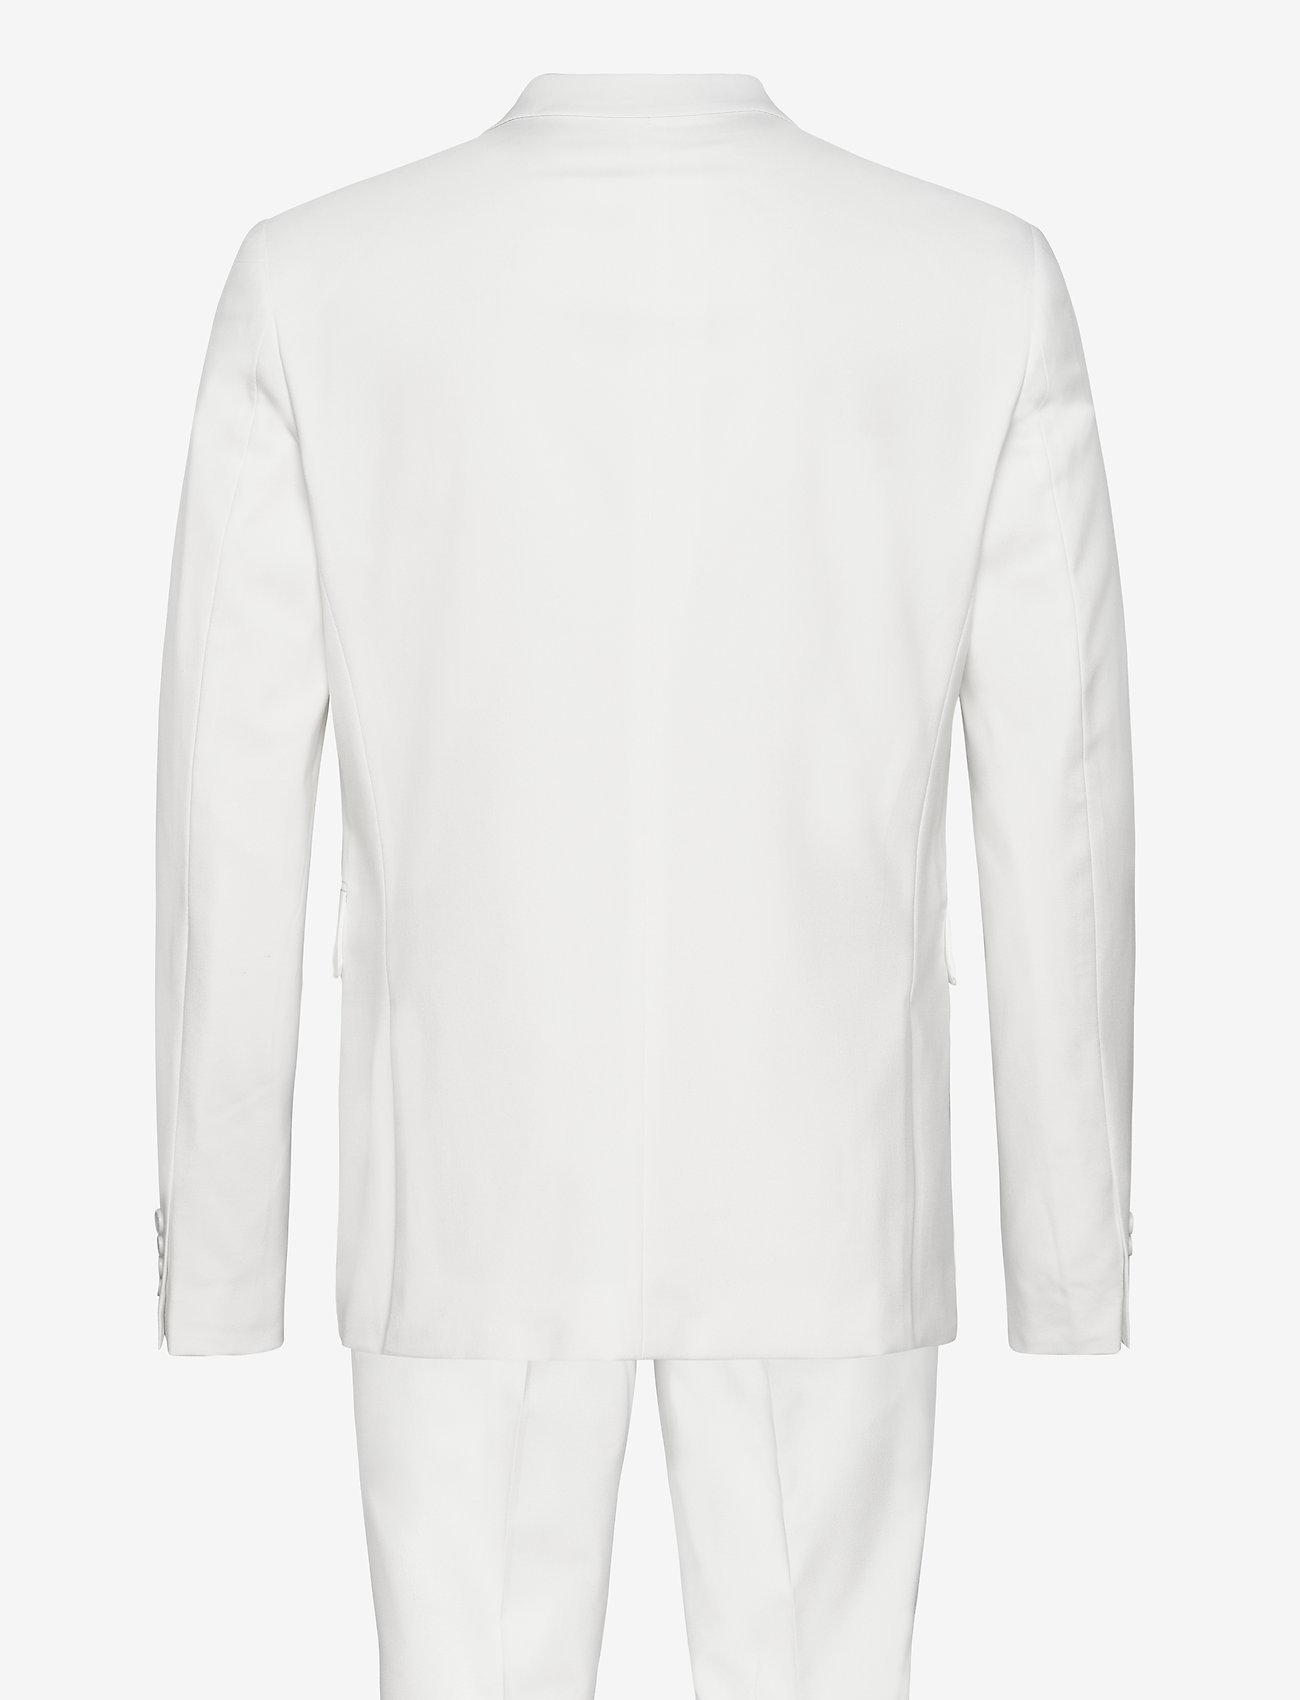 Lindbergh - Plain mens suit - normal lenght - double breasted suits - white - 1